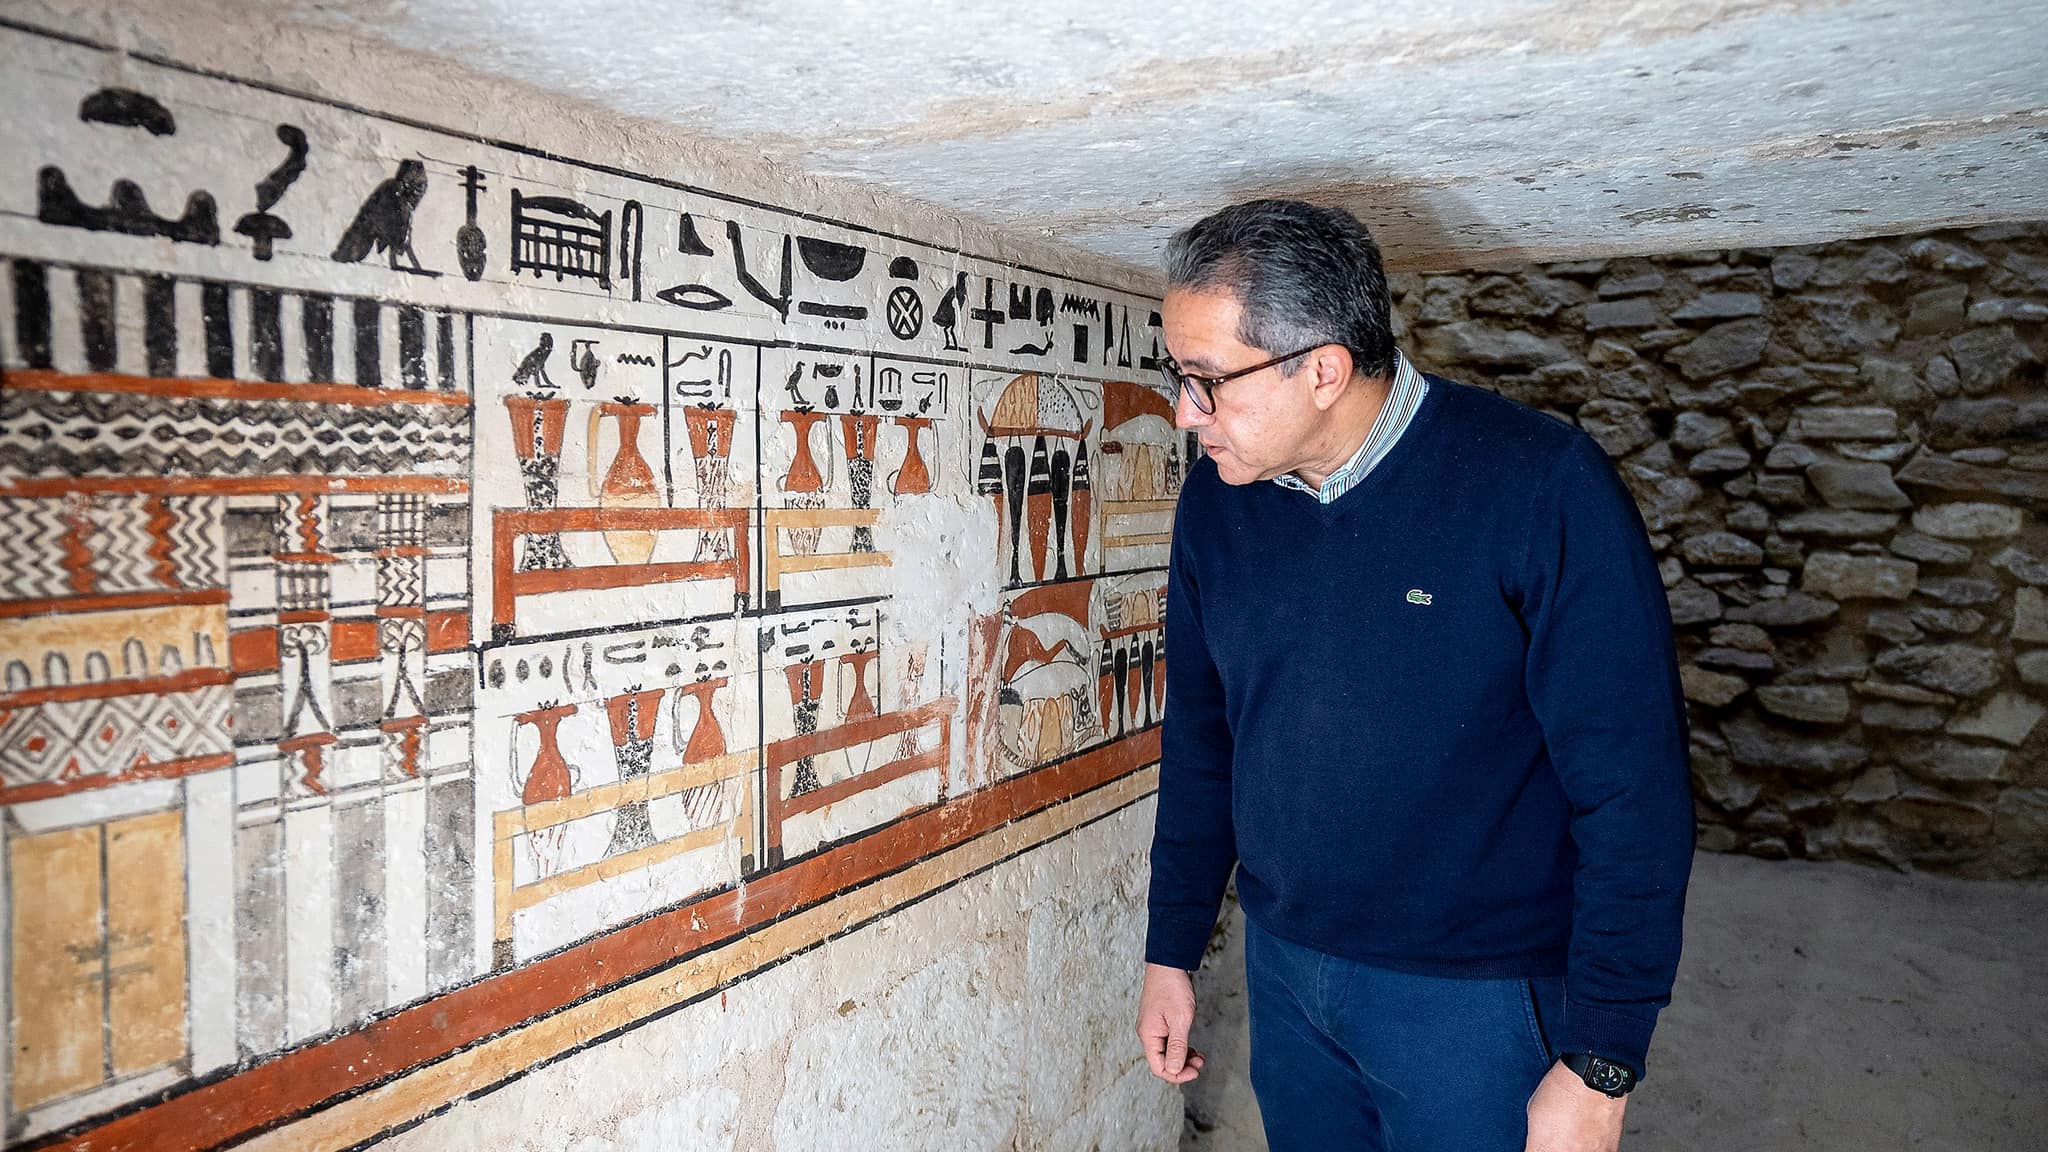 Five ornate tombs over 4,000 years old have been discovered in Egypt